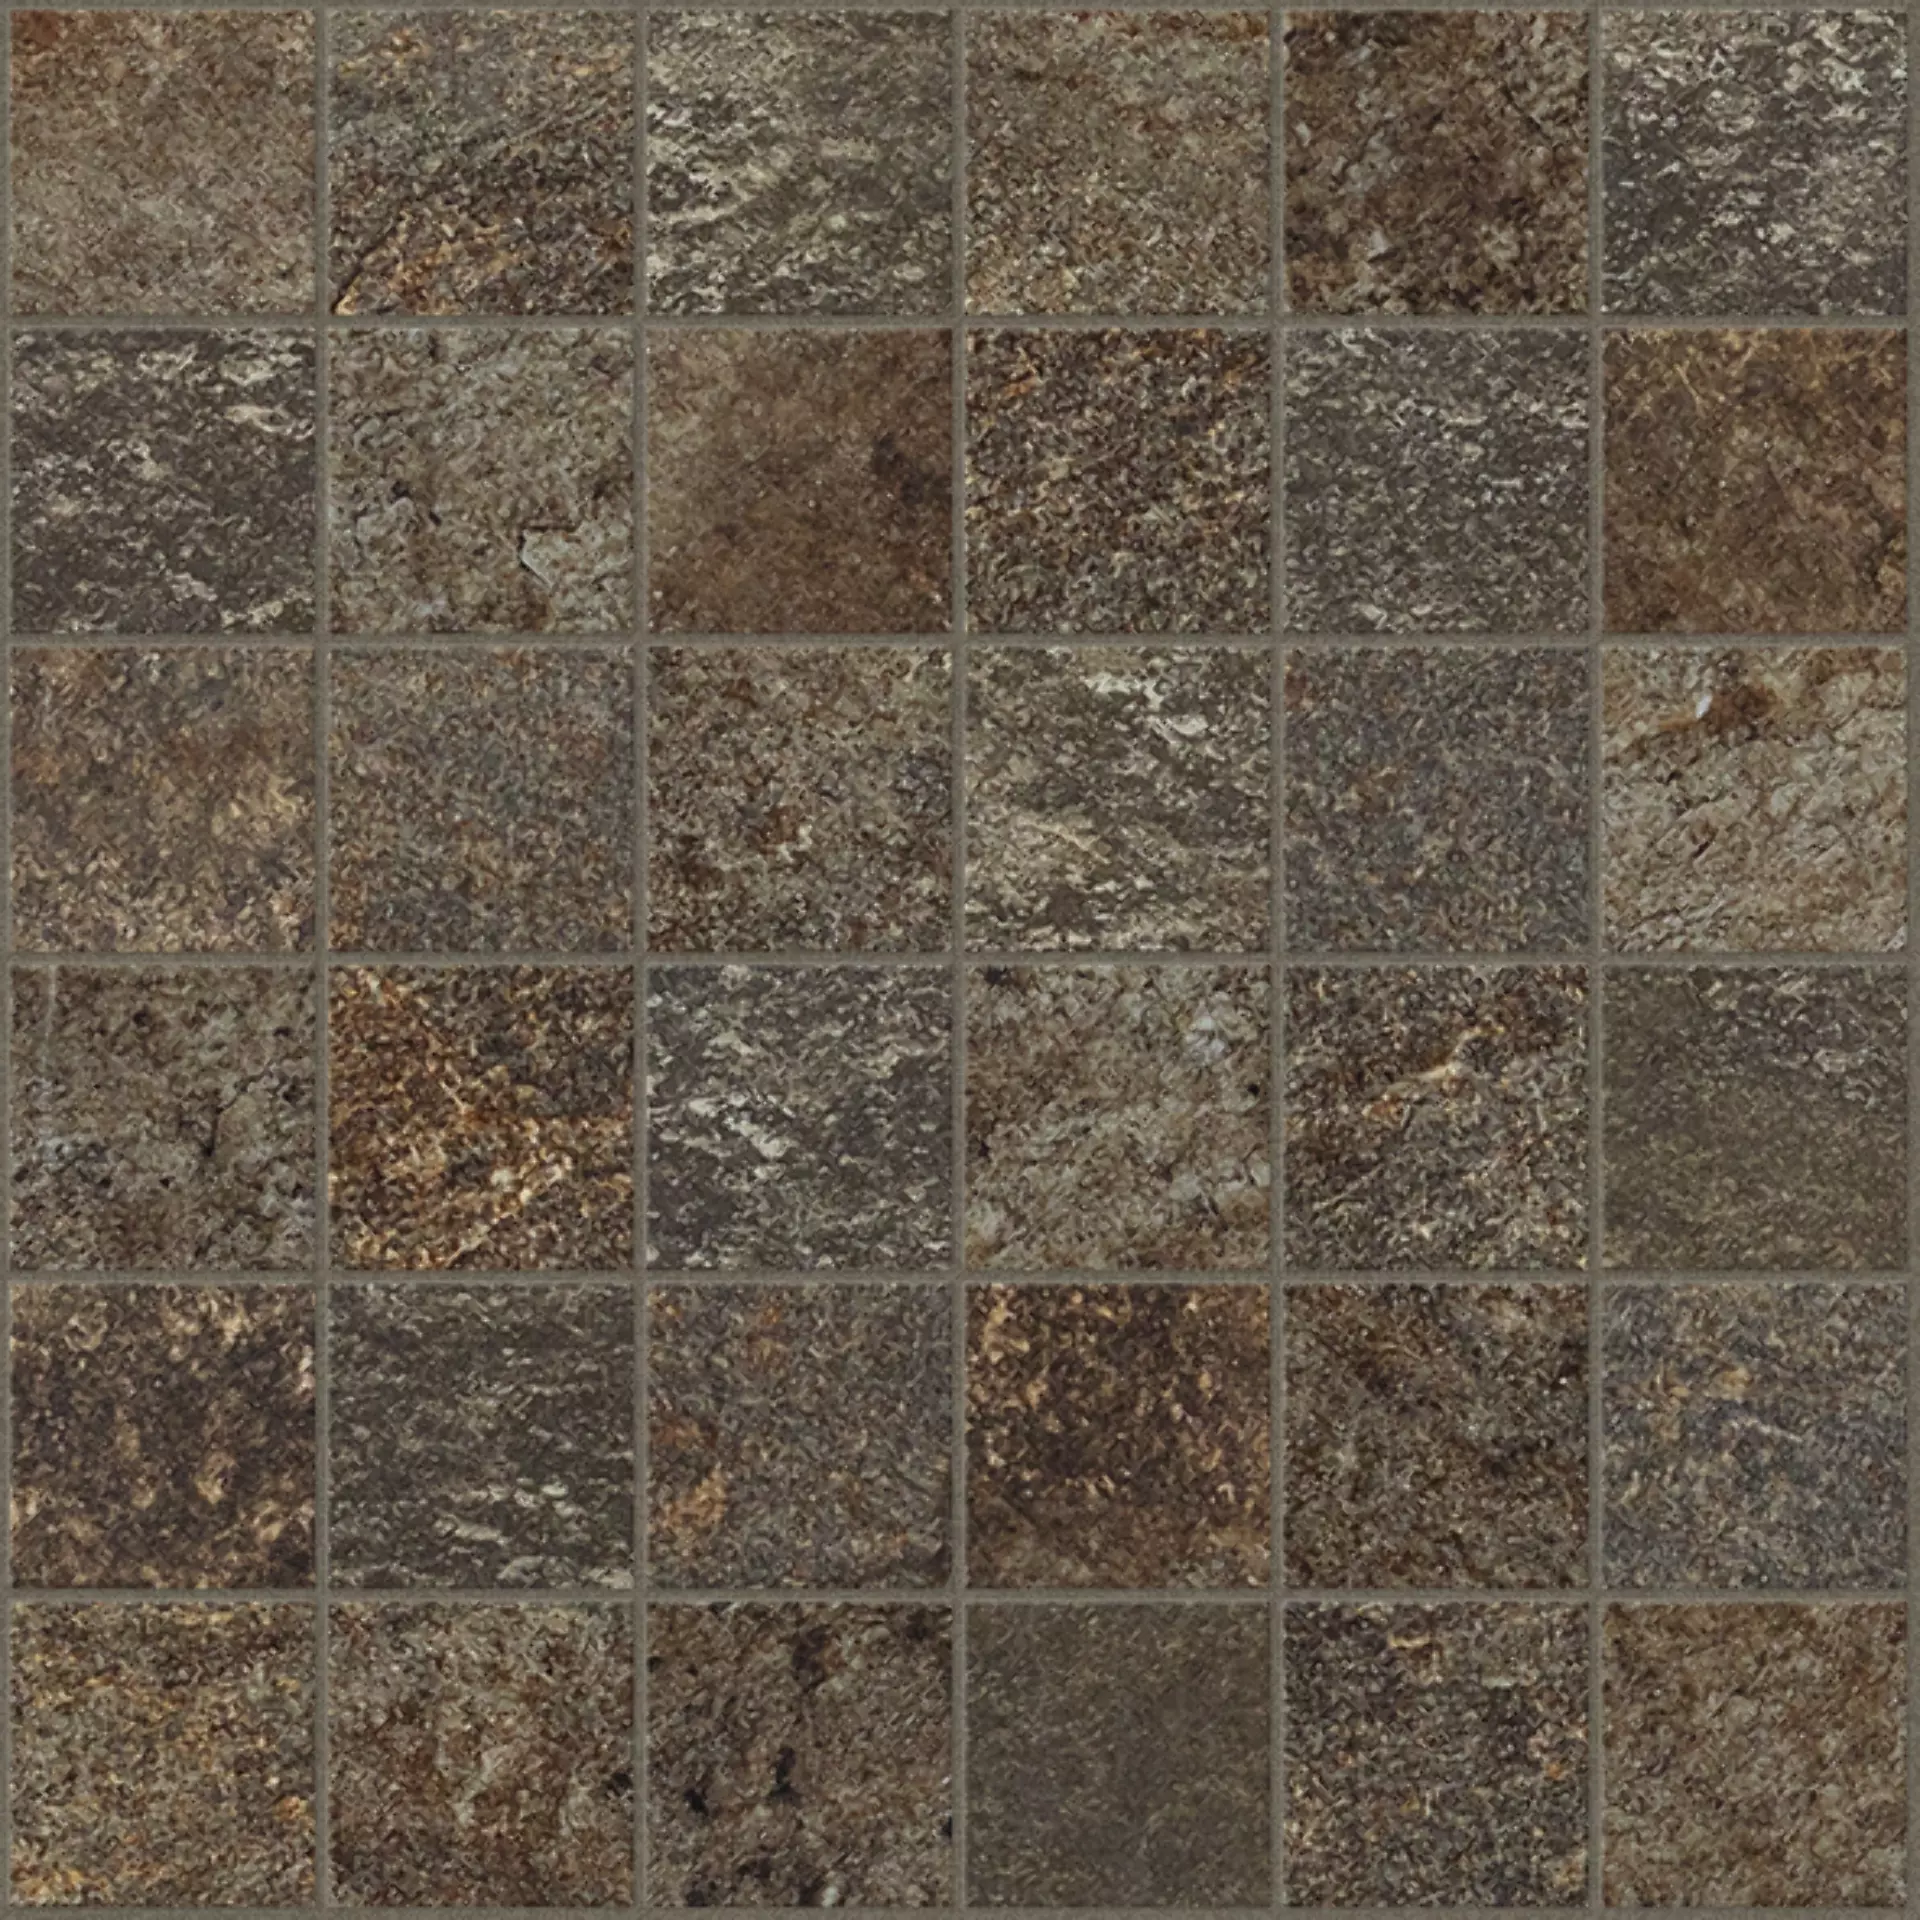 Cercom Absolute Ground Naturale Mosaic 5X5 1076677 30x30cm rectified